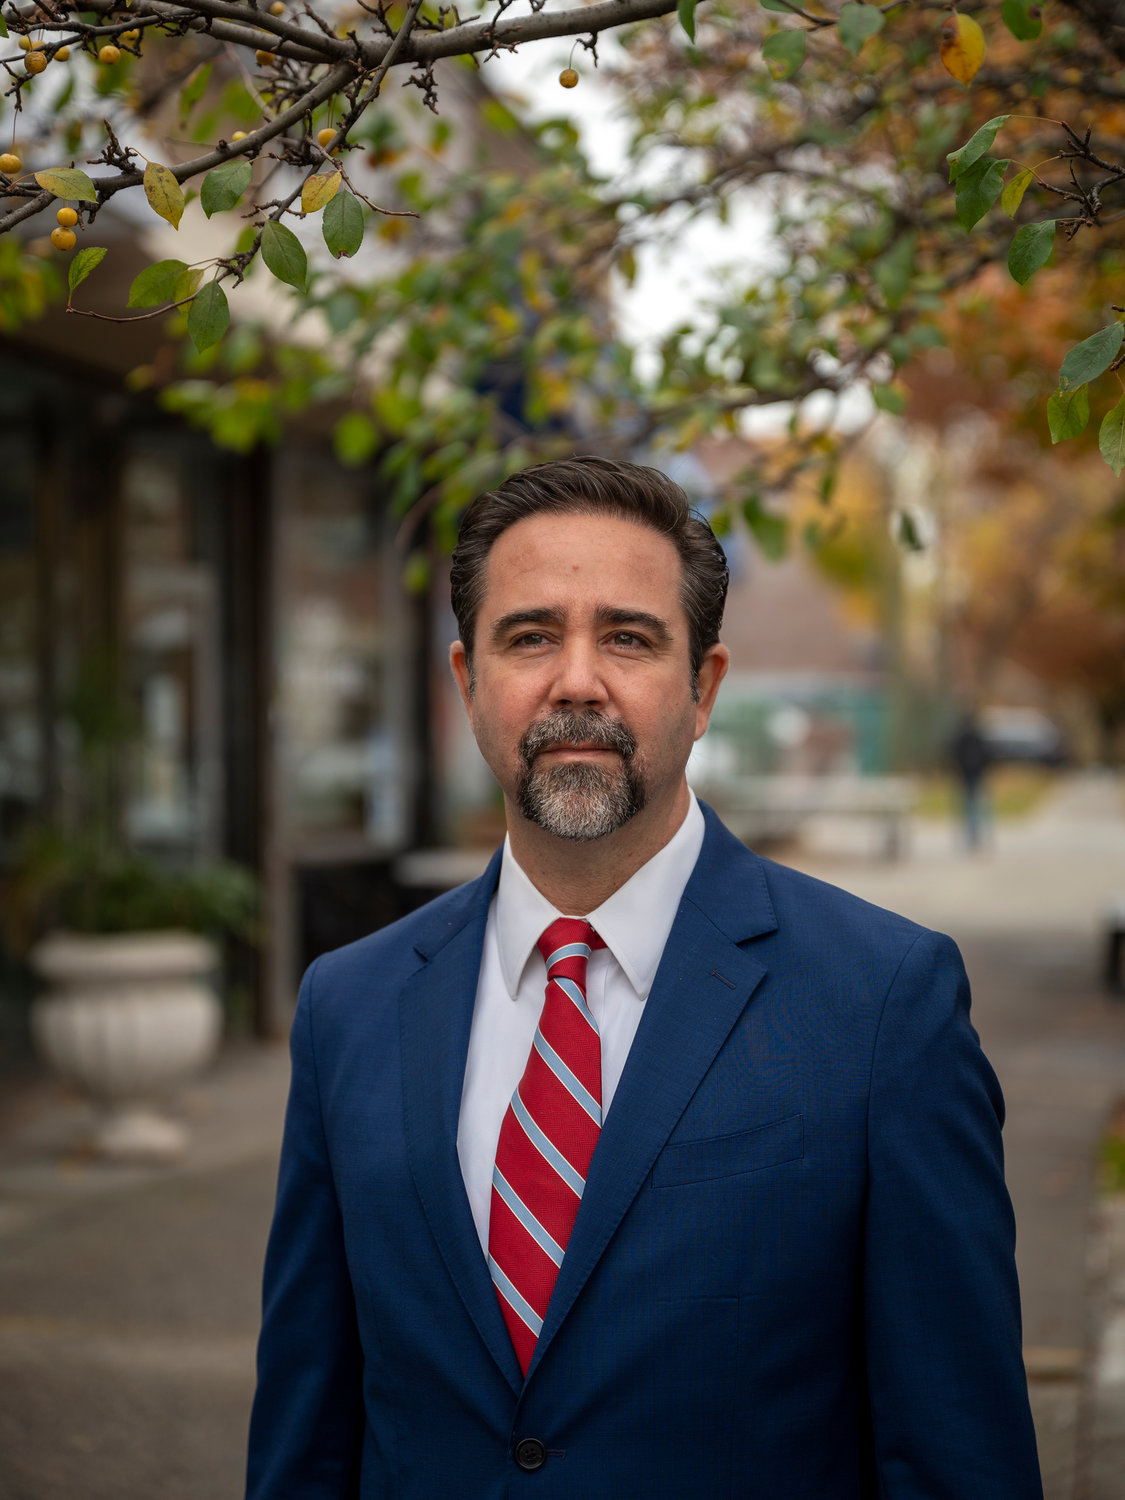 Manuel Casanova, a New Rochelle-based businessman and politico, is running against U.S. Rep. Jamaal Bowman for his congressional seat in this year’s Democratic primary. Casanova says his experience negotiating largee mergers in the private sector has prepared him for making deals with those who don’t agree with him in congress.